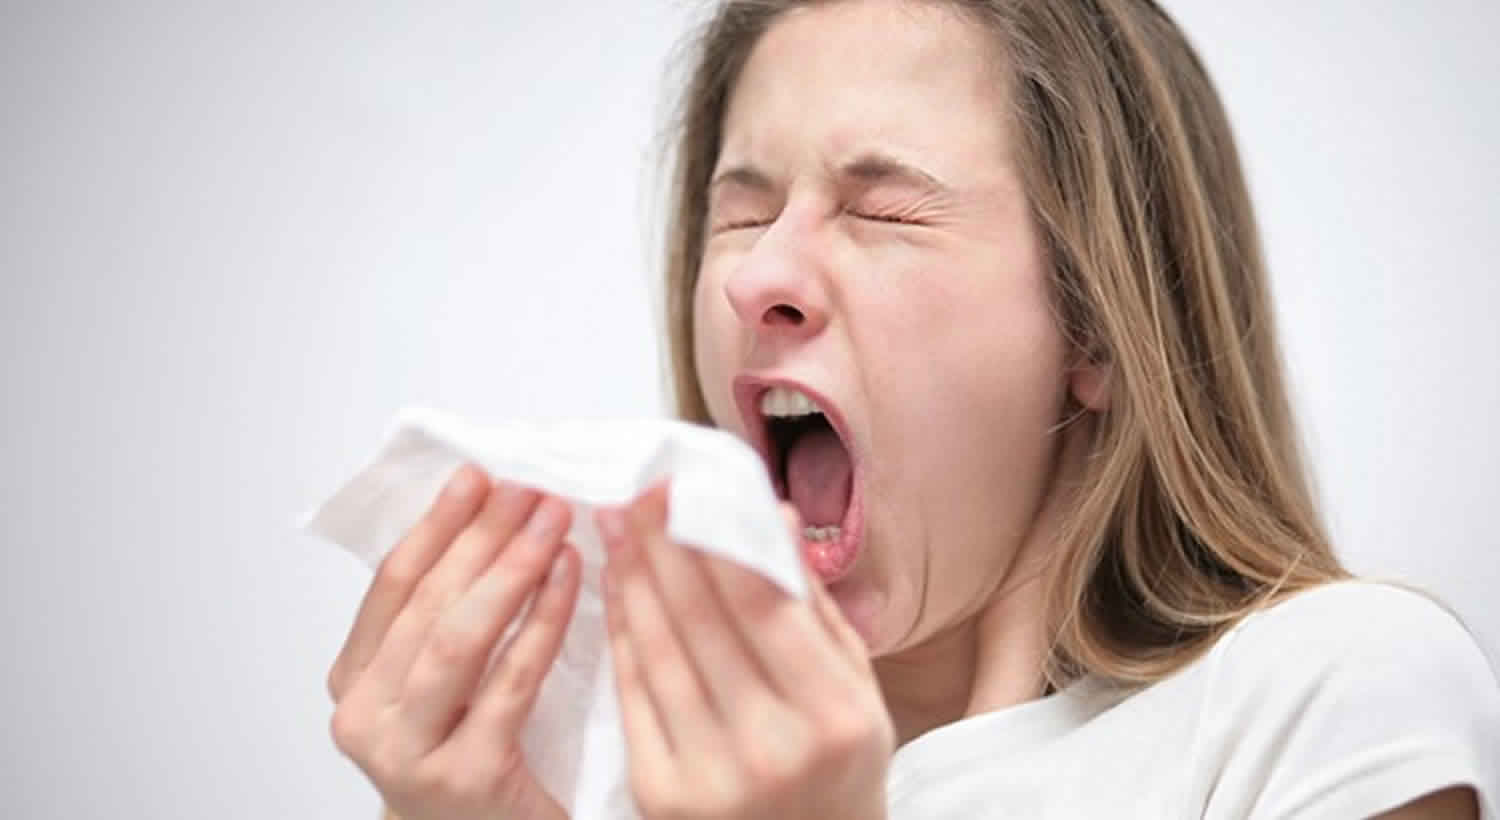 Sneezing or sneezing fit causes & how to stop sneezing